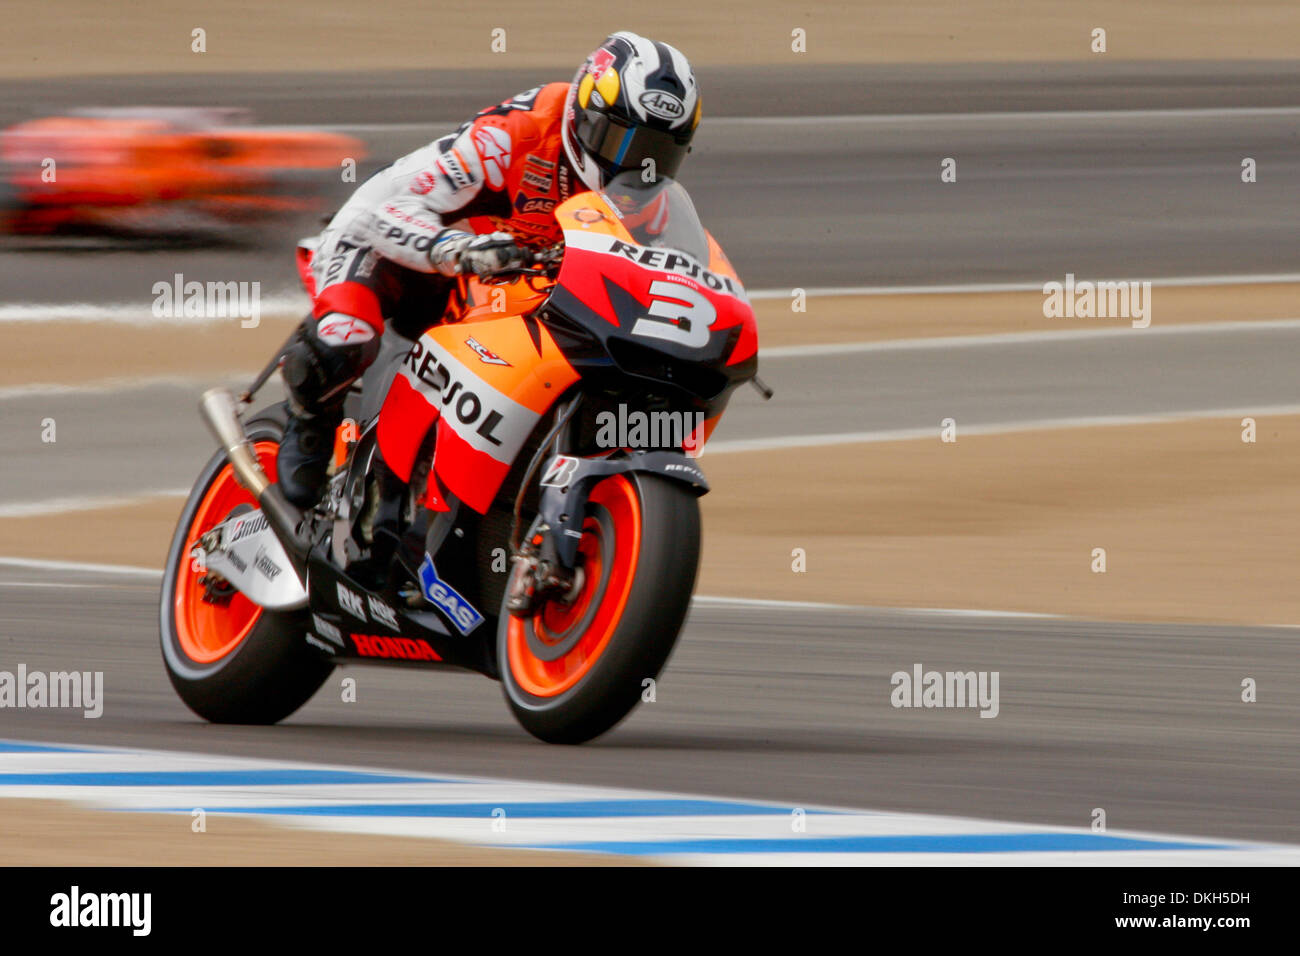 July 05, 2009 - Monterey, California, USA - 05 July 2009: Dani Perdosa, of Sabadell, Barcelona, rides the #3 motorcycle for the Respol Honda Team Honda during MotoGP warm-up at the  Mazda Raceway Laguna Seca, in Monterey, Calif. MotoGP's 8th race is set to take place on today, July 5, 2009 at 14:00 PST prior to making its next stop  in Germany. (Credit Image: © Konsta Goumenidis/So Stock Photo